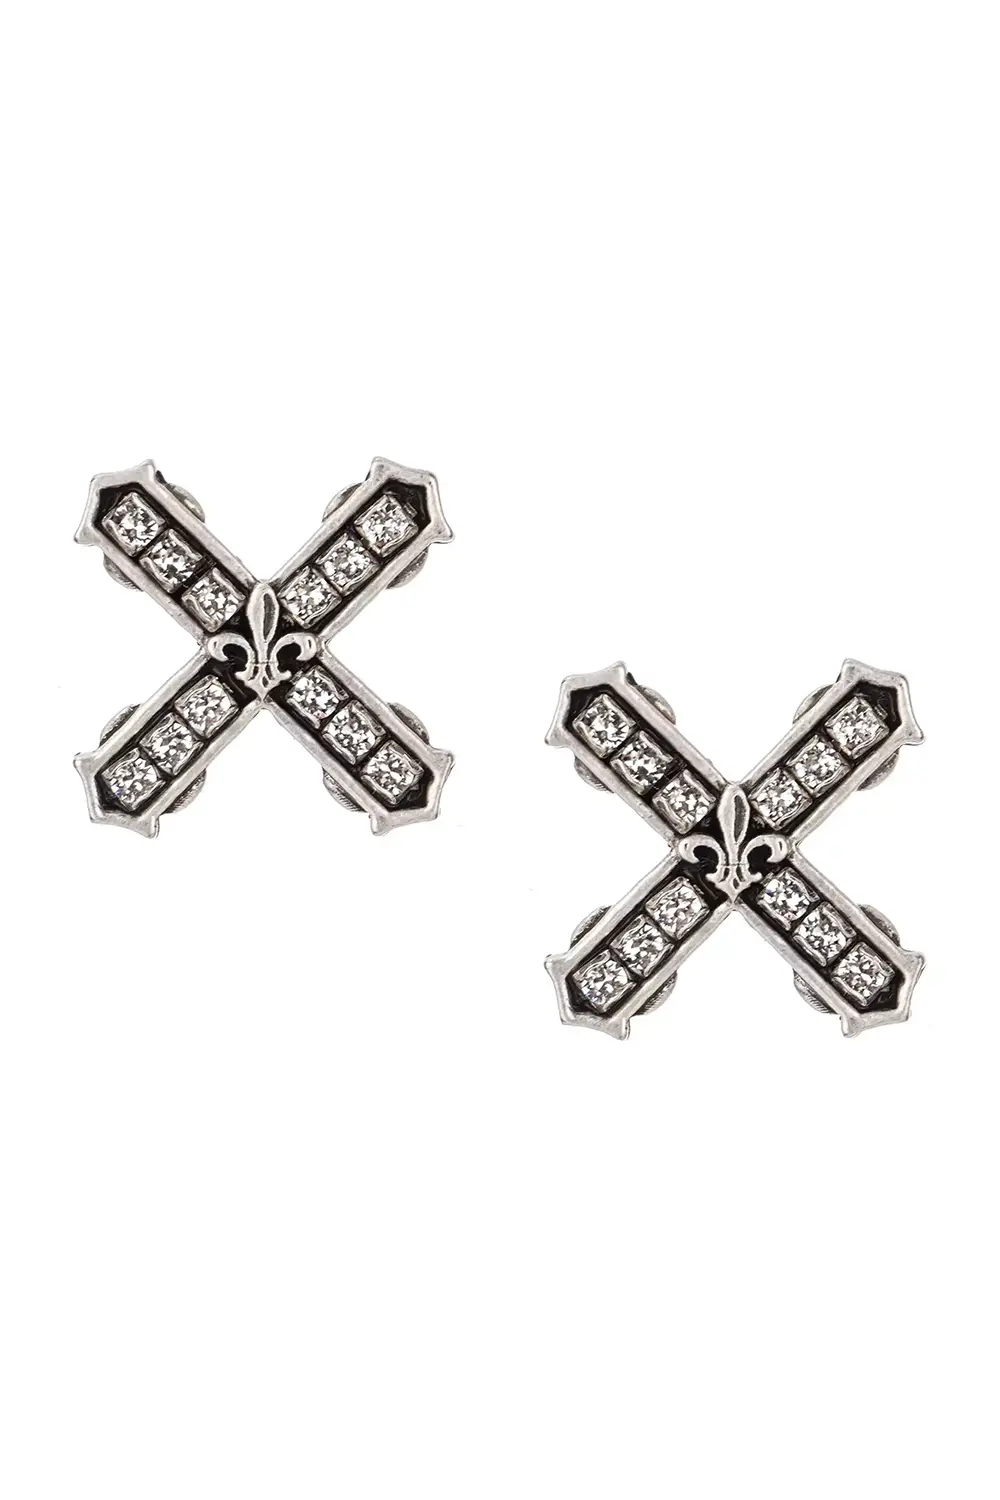 French Kande Sliver OX Swrvski French Kiss Earrings